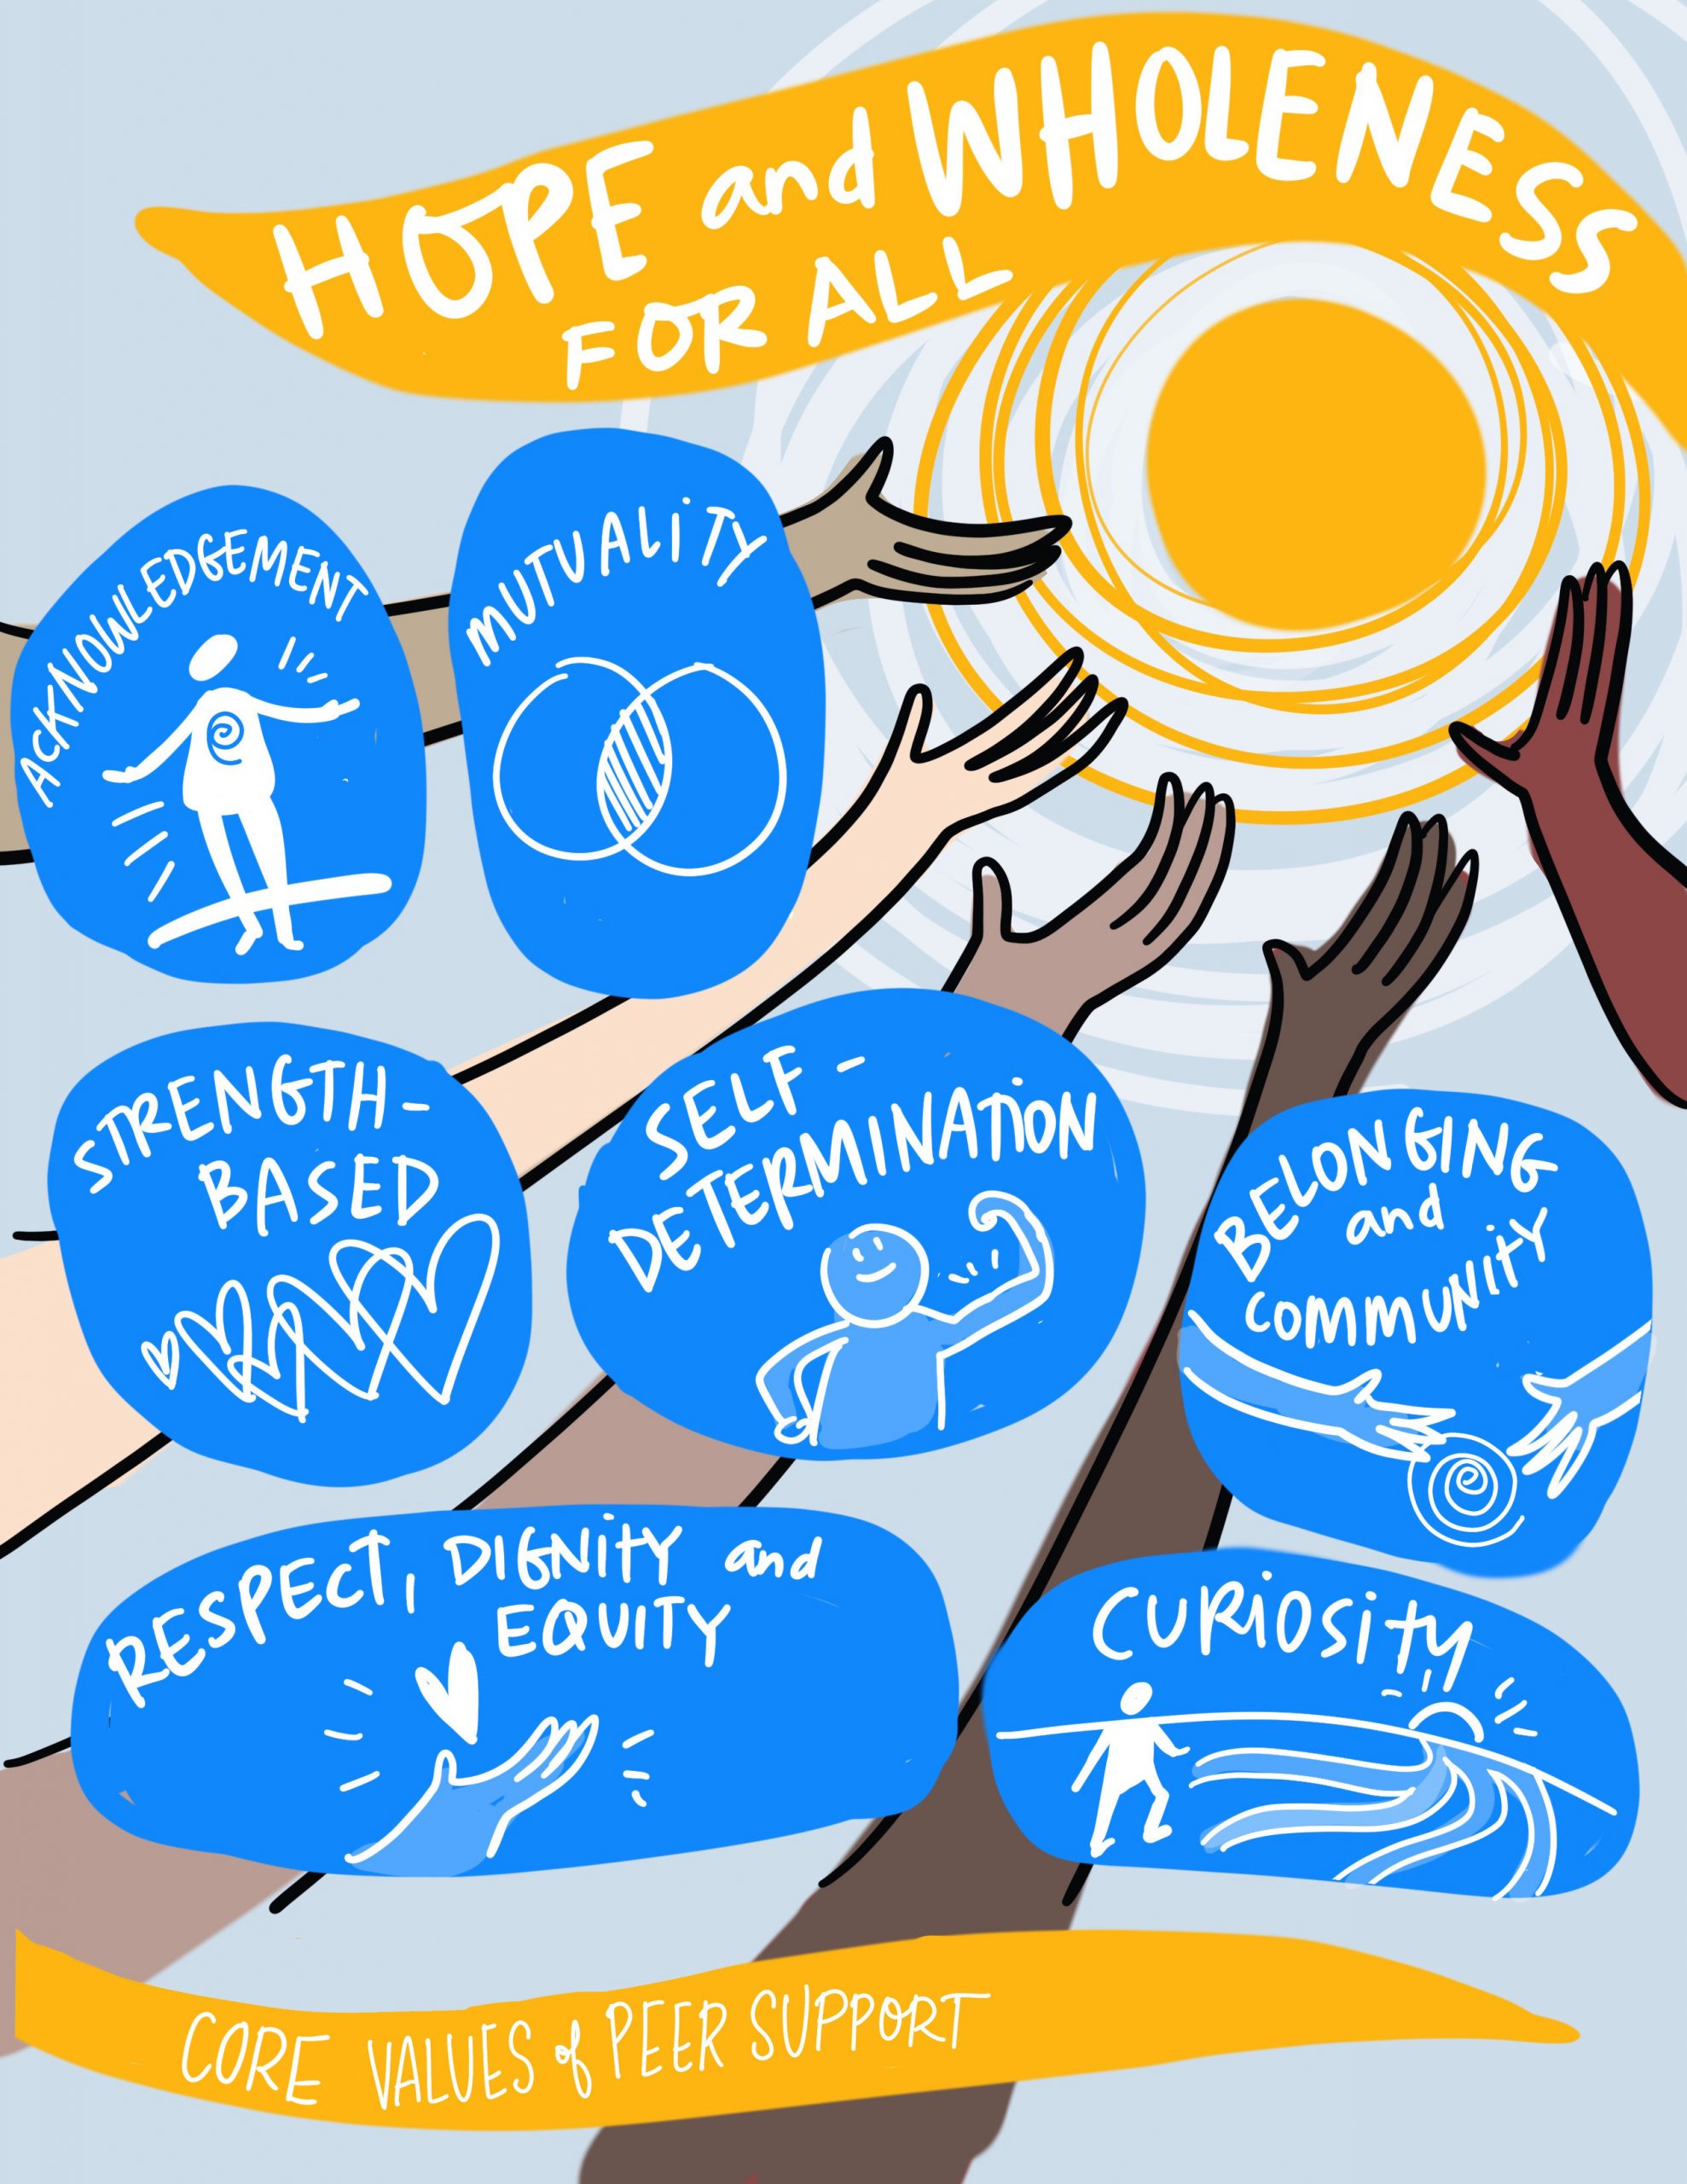 core value of peer support: acknowledgement, mutuality, strength-based, self-determination, belonging and community, respect dignity and equity, curiosity.